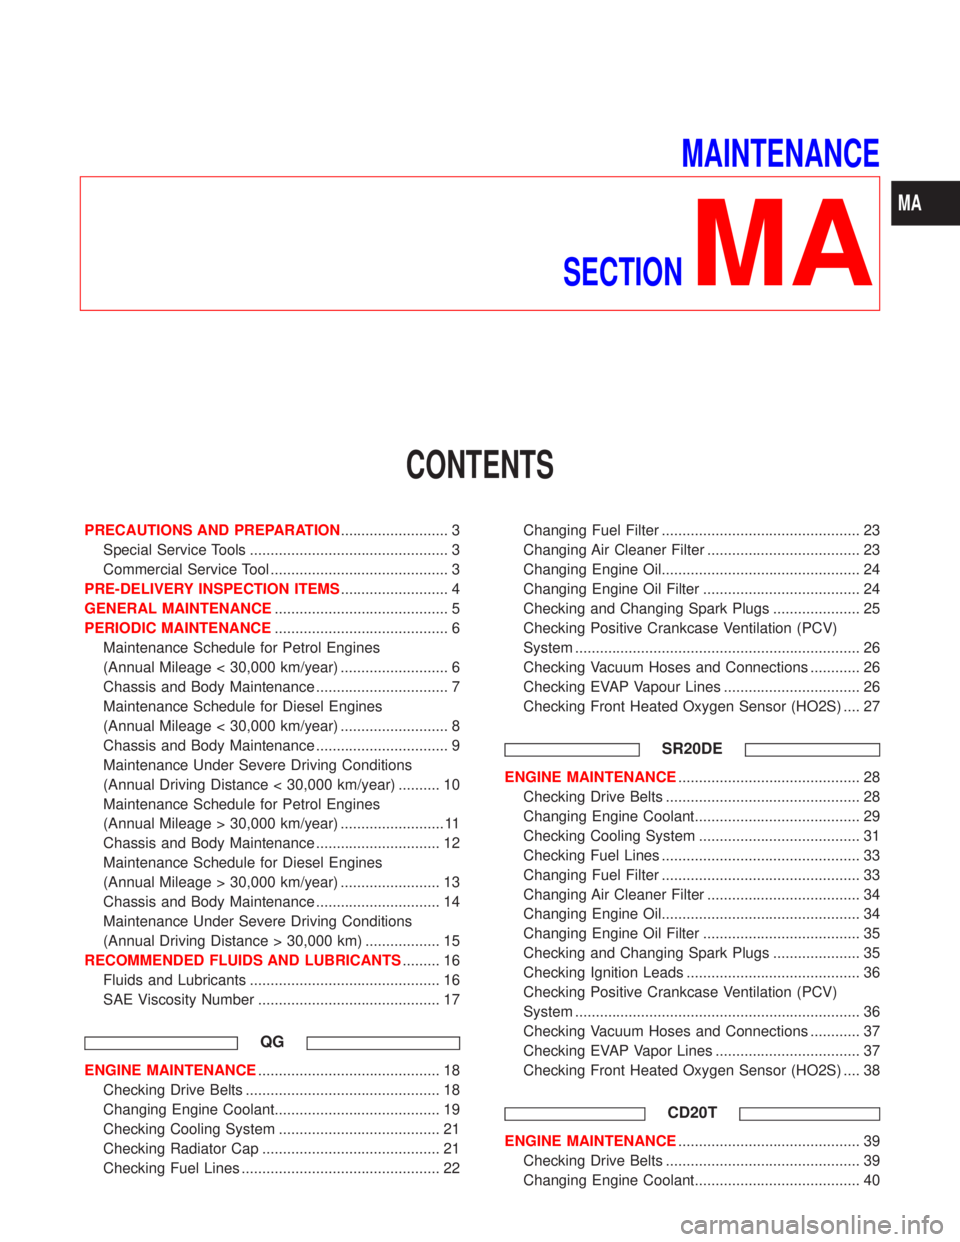 NISSAN PRIMERA 1999  Electronic Repair Manual MAINTENANCE
SECTION
MA
CONTENTS
PRECAUTIONS AND PREPARATION.......................... 3
Special Service Tools ................................................ 3
Commercial Service Tool ...............